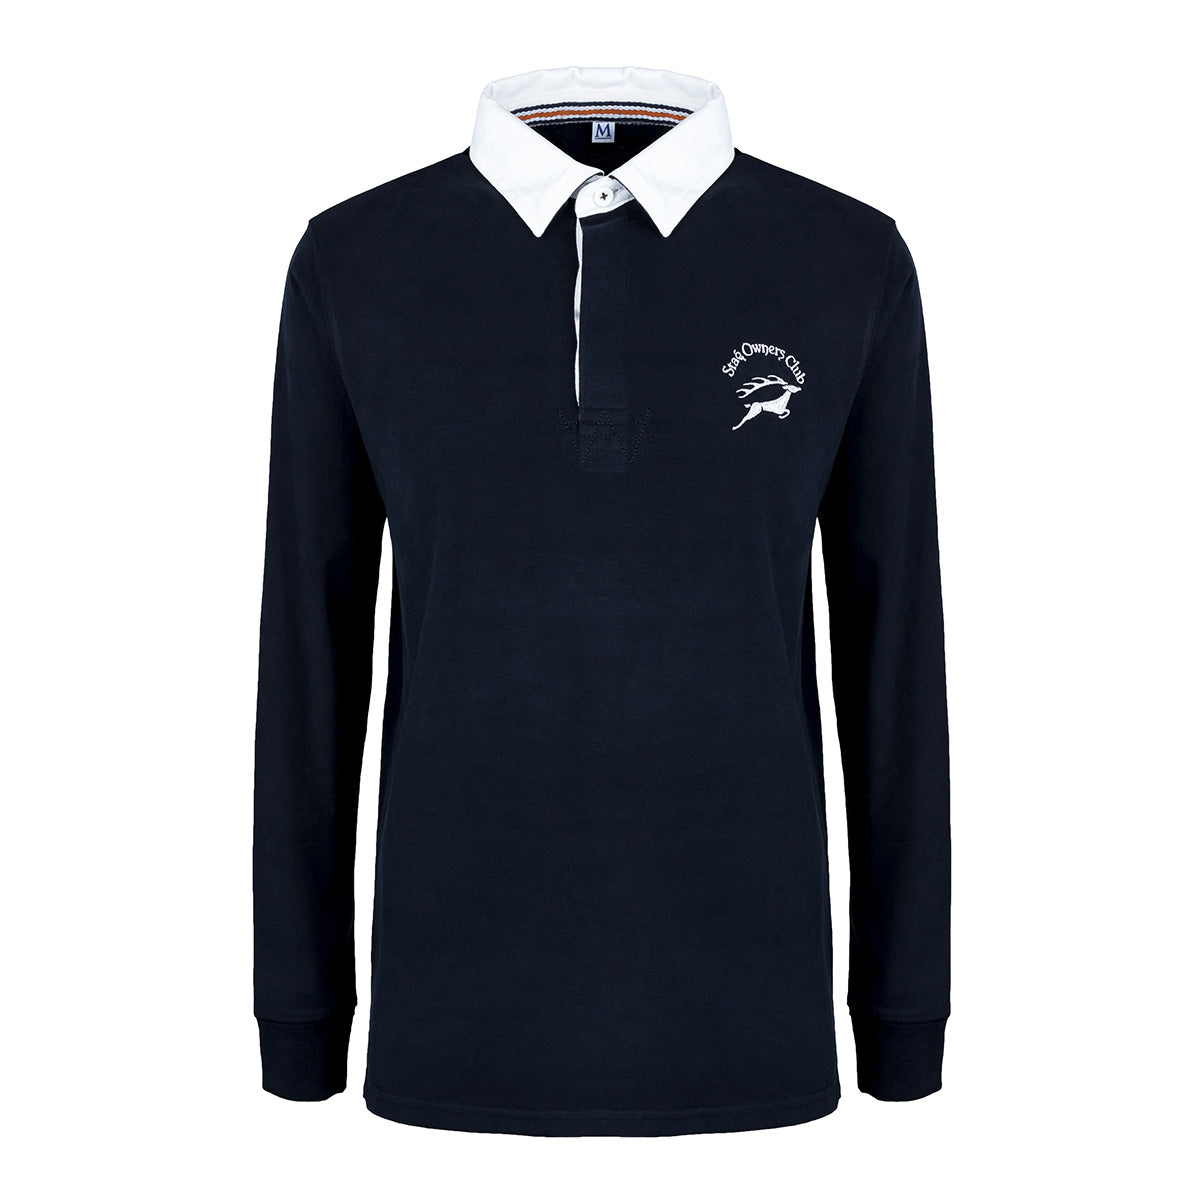 'New Style' Brushed Cotton Rugby Shirt with SOC Logo - Navy Blue